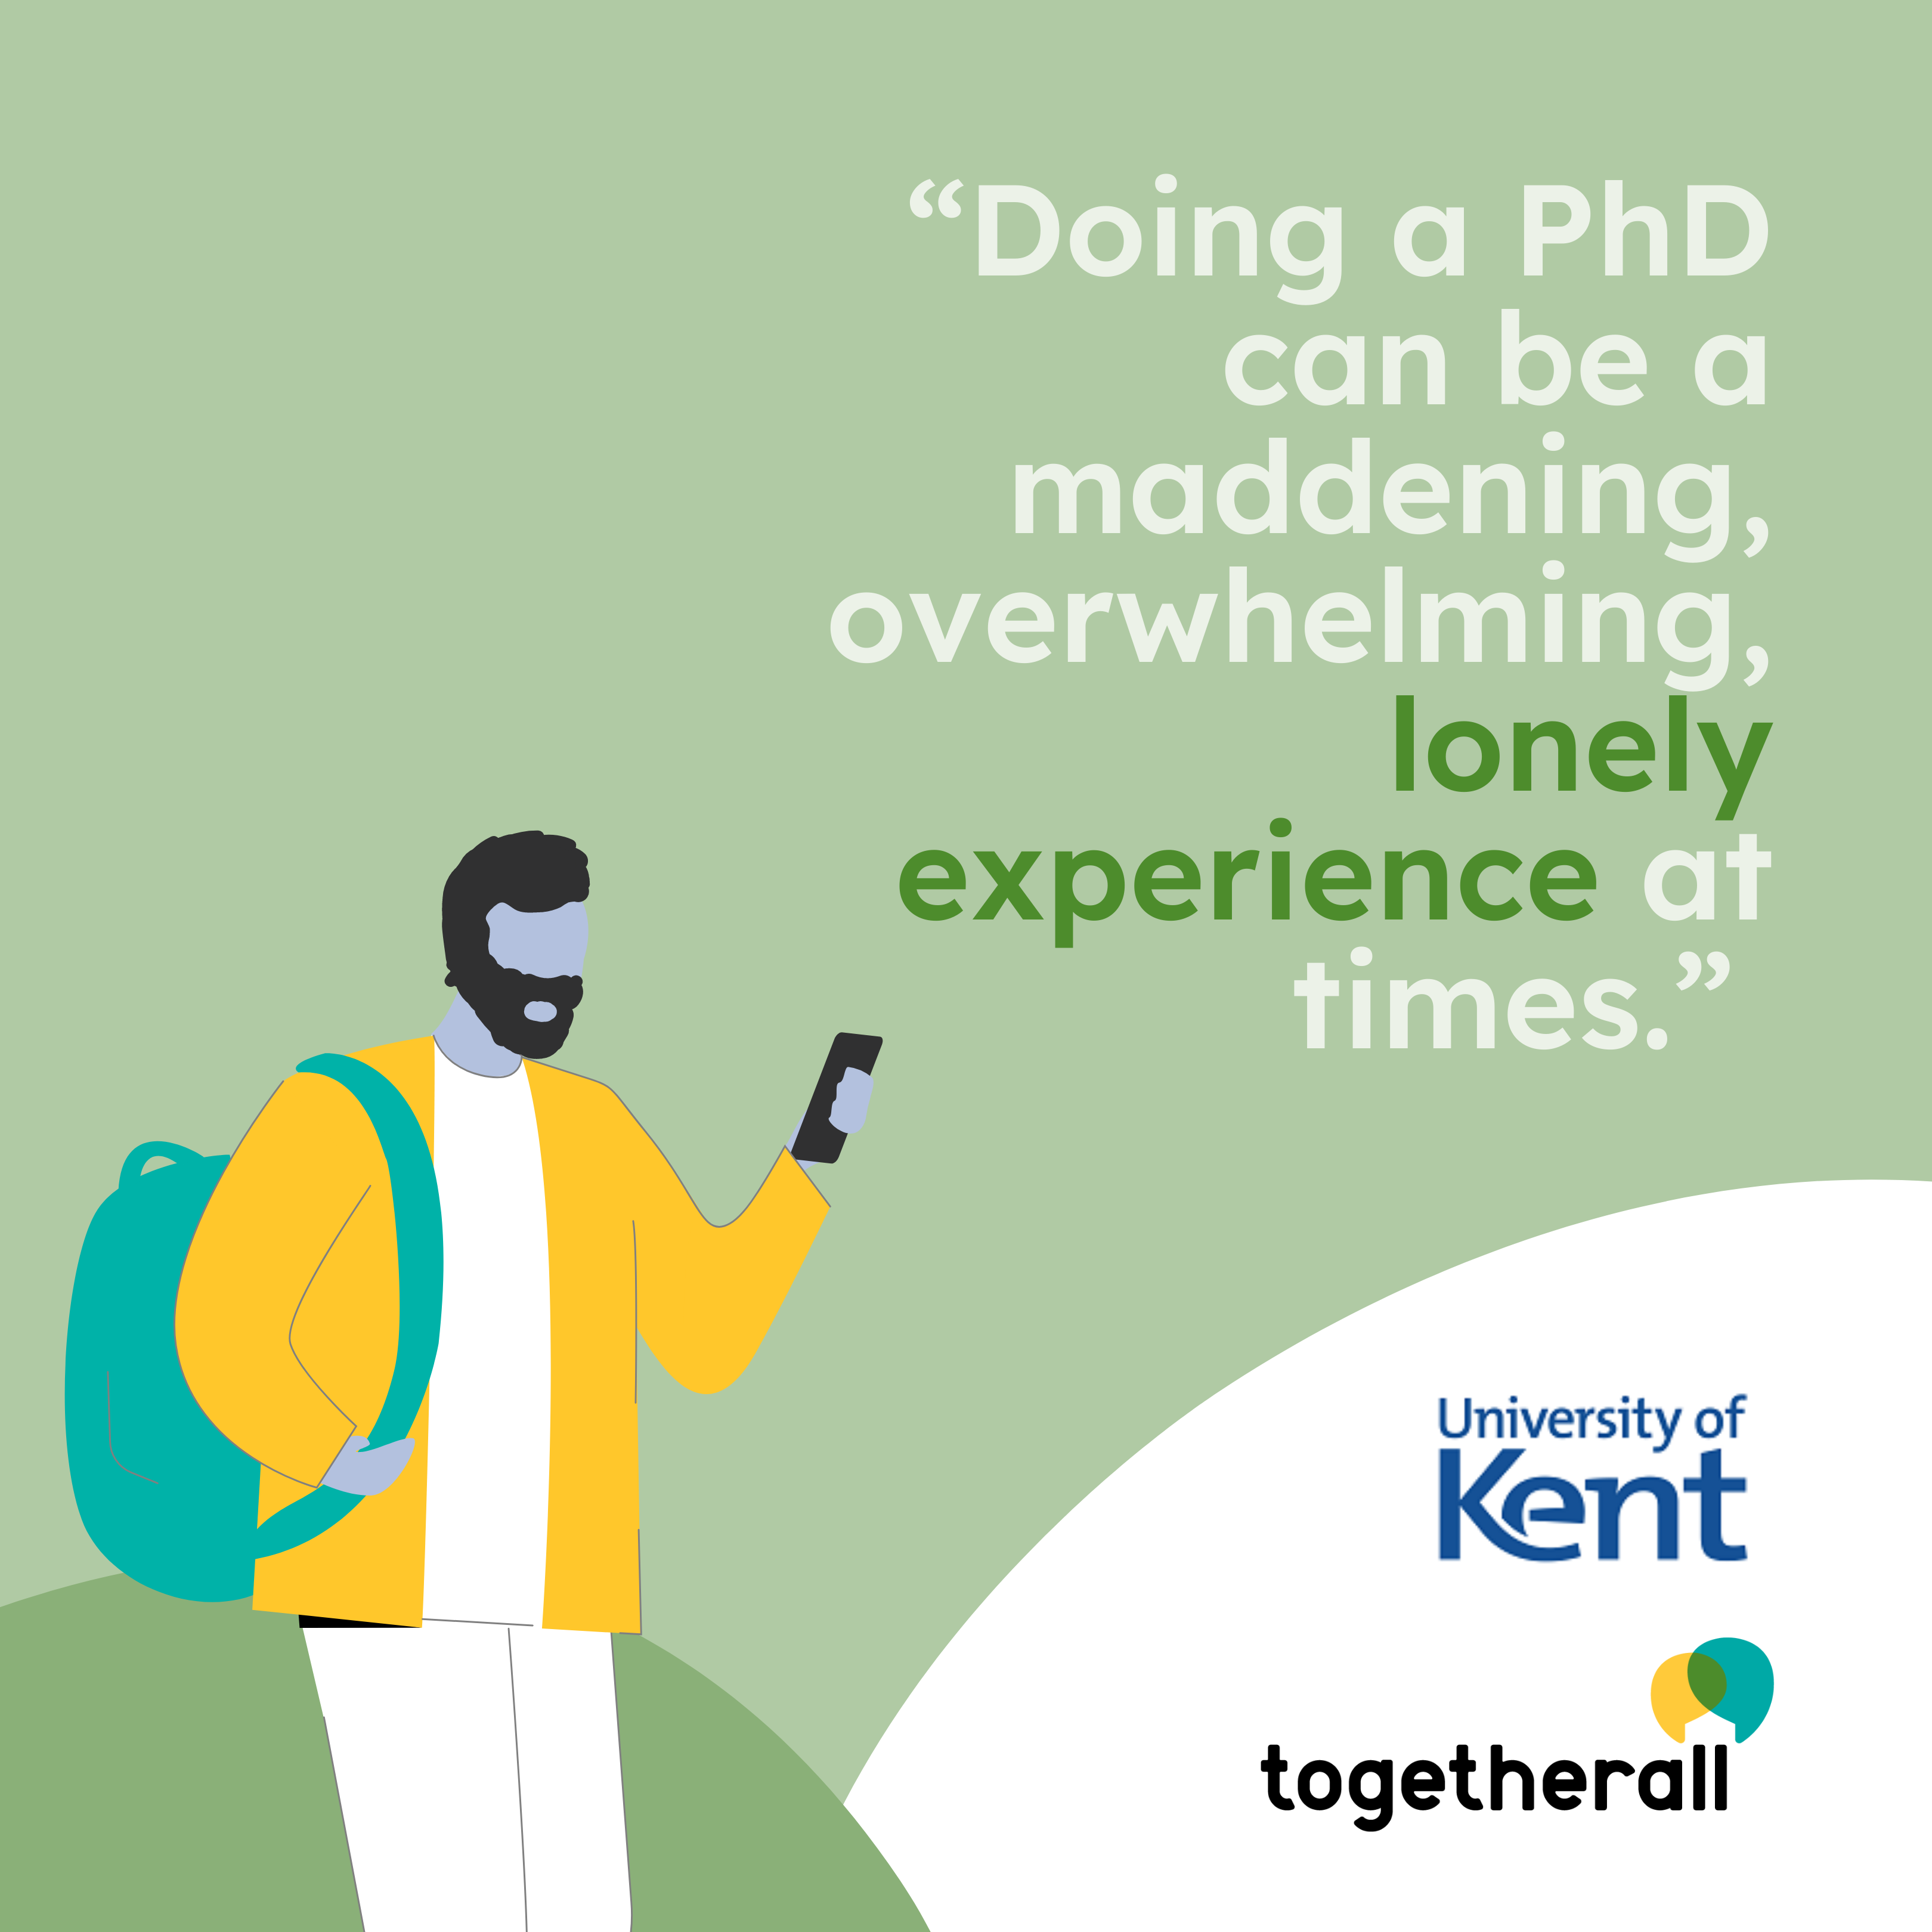 “Doing a PhD can be a maddening, overwhelming, lonely experience at times…”